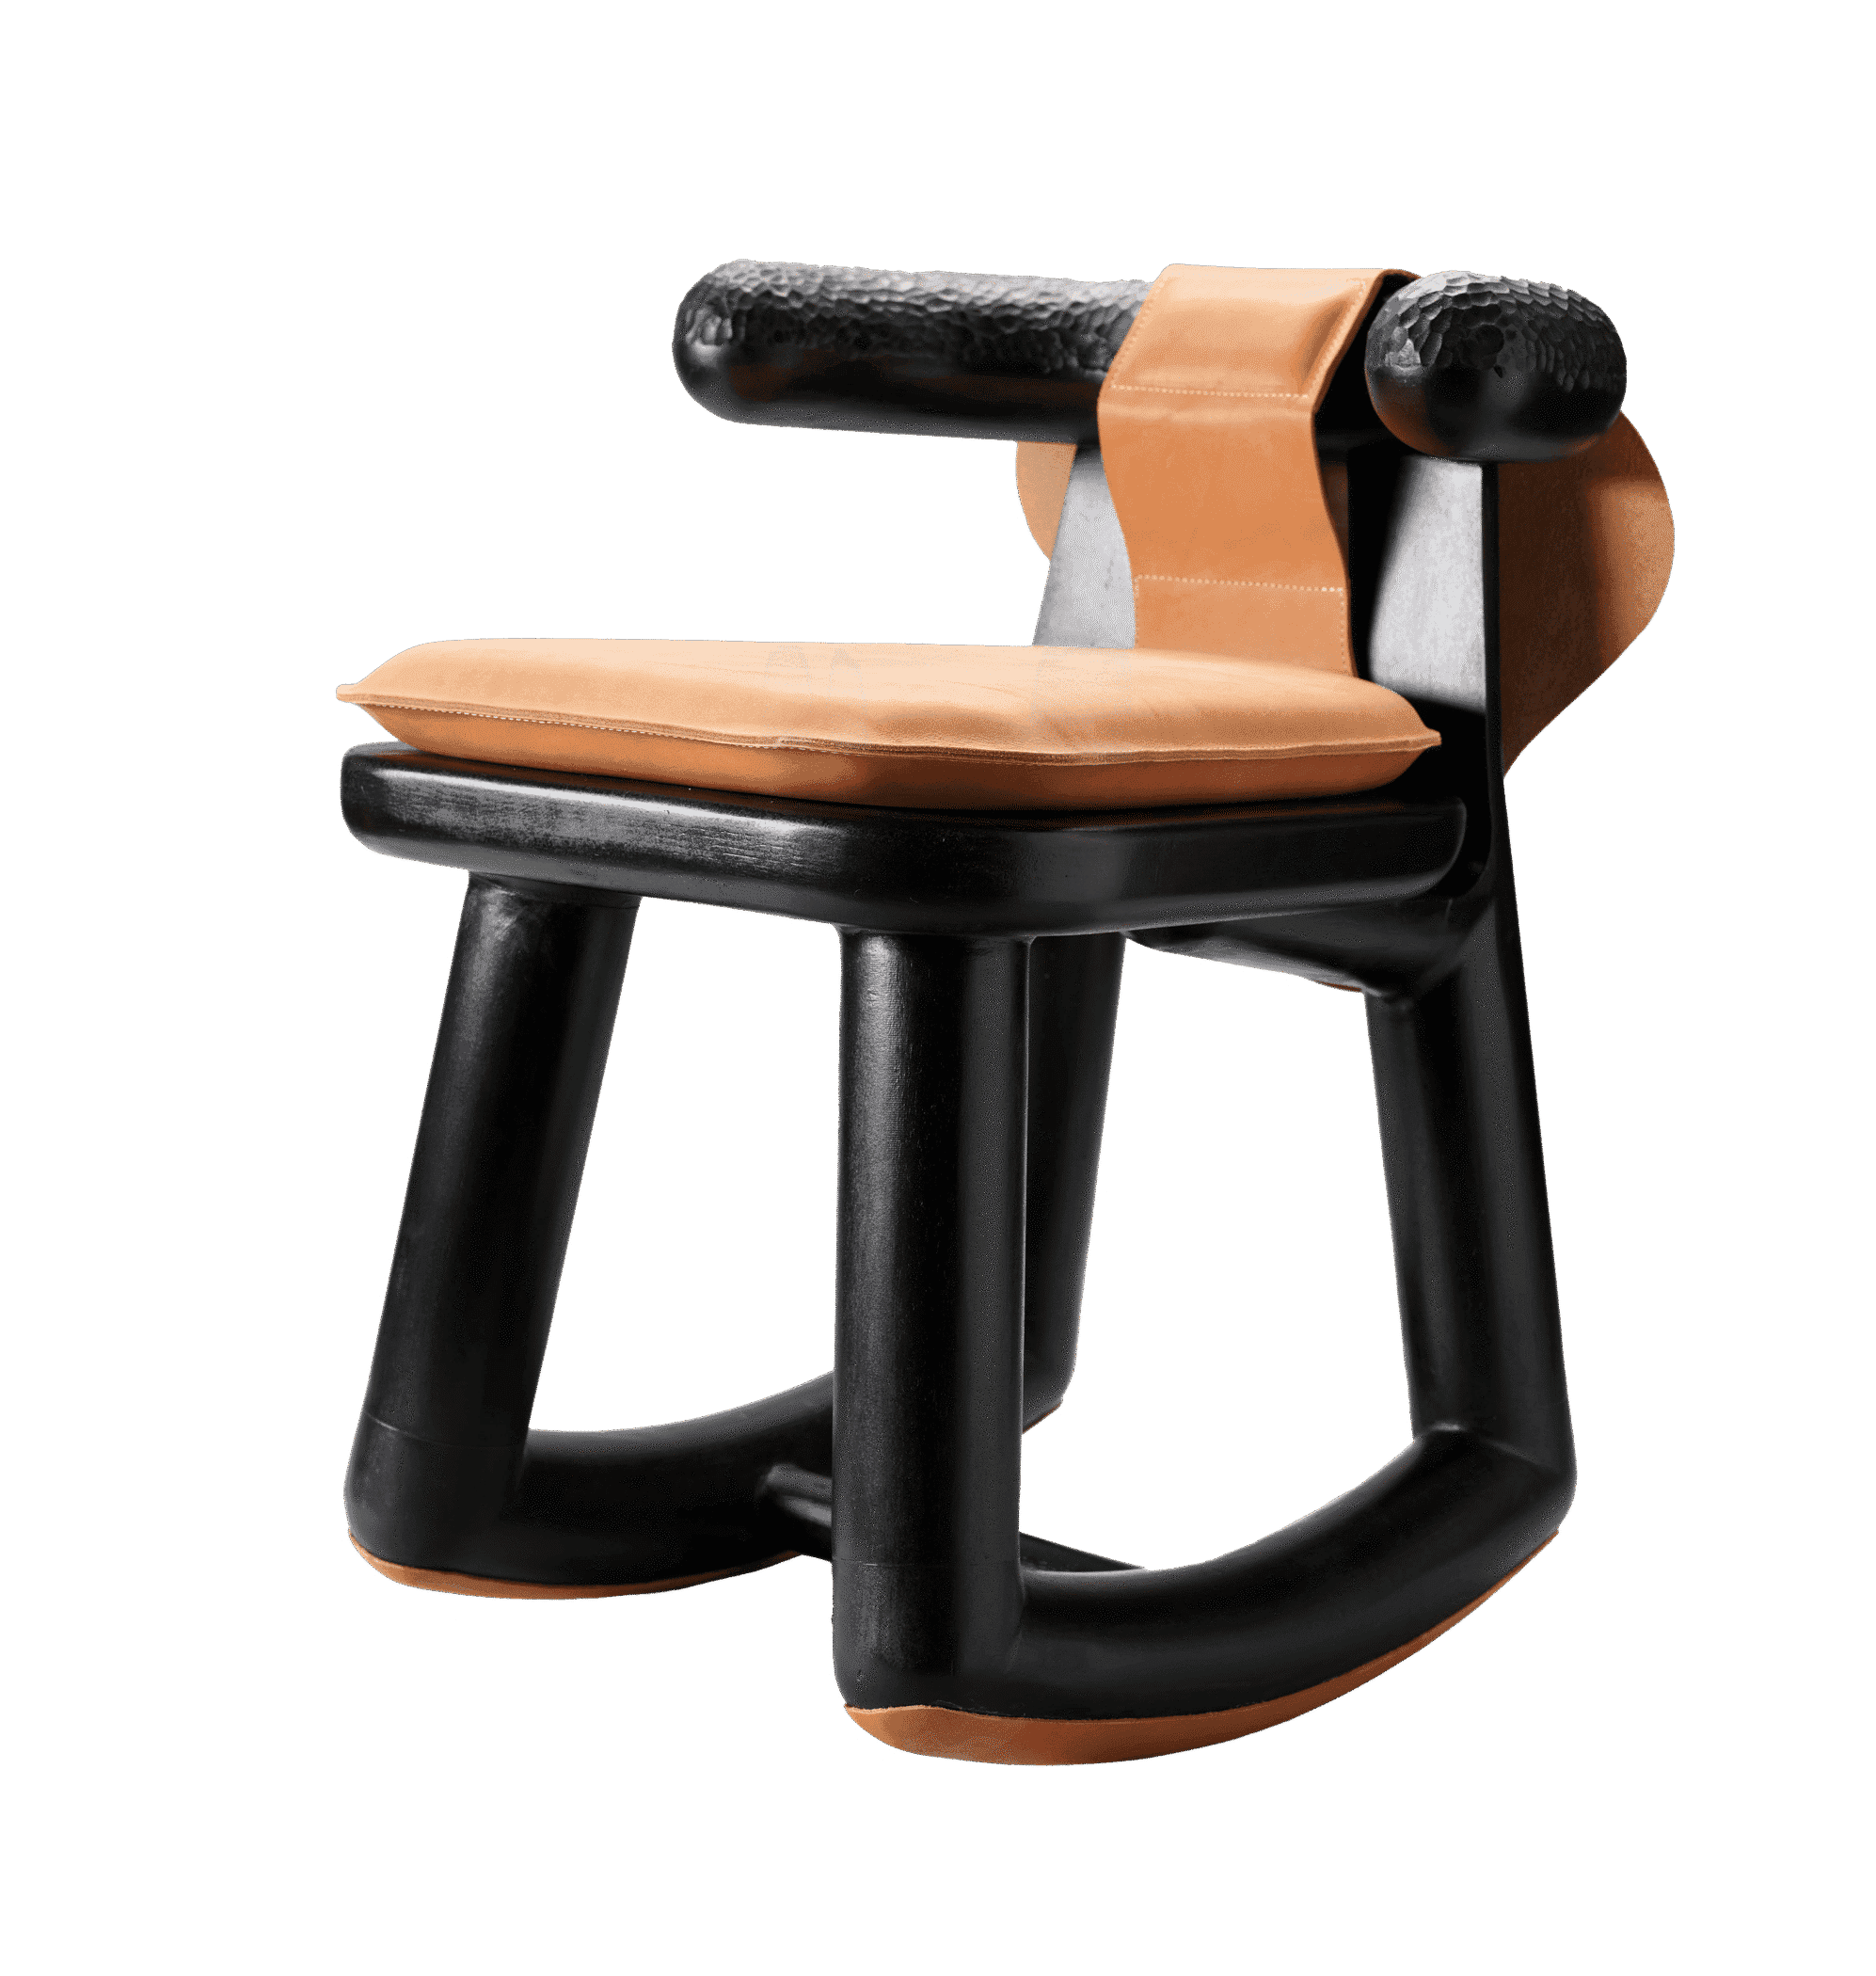 Small black wooden rocking chair with tan colored square seat.